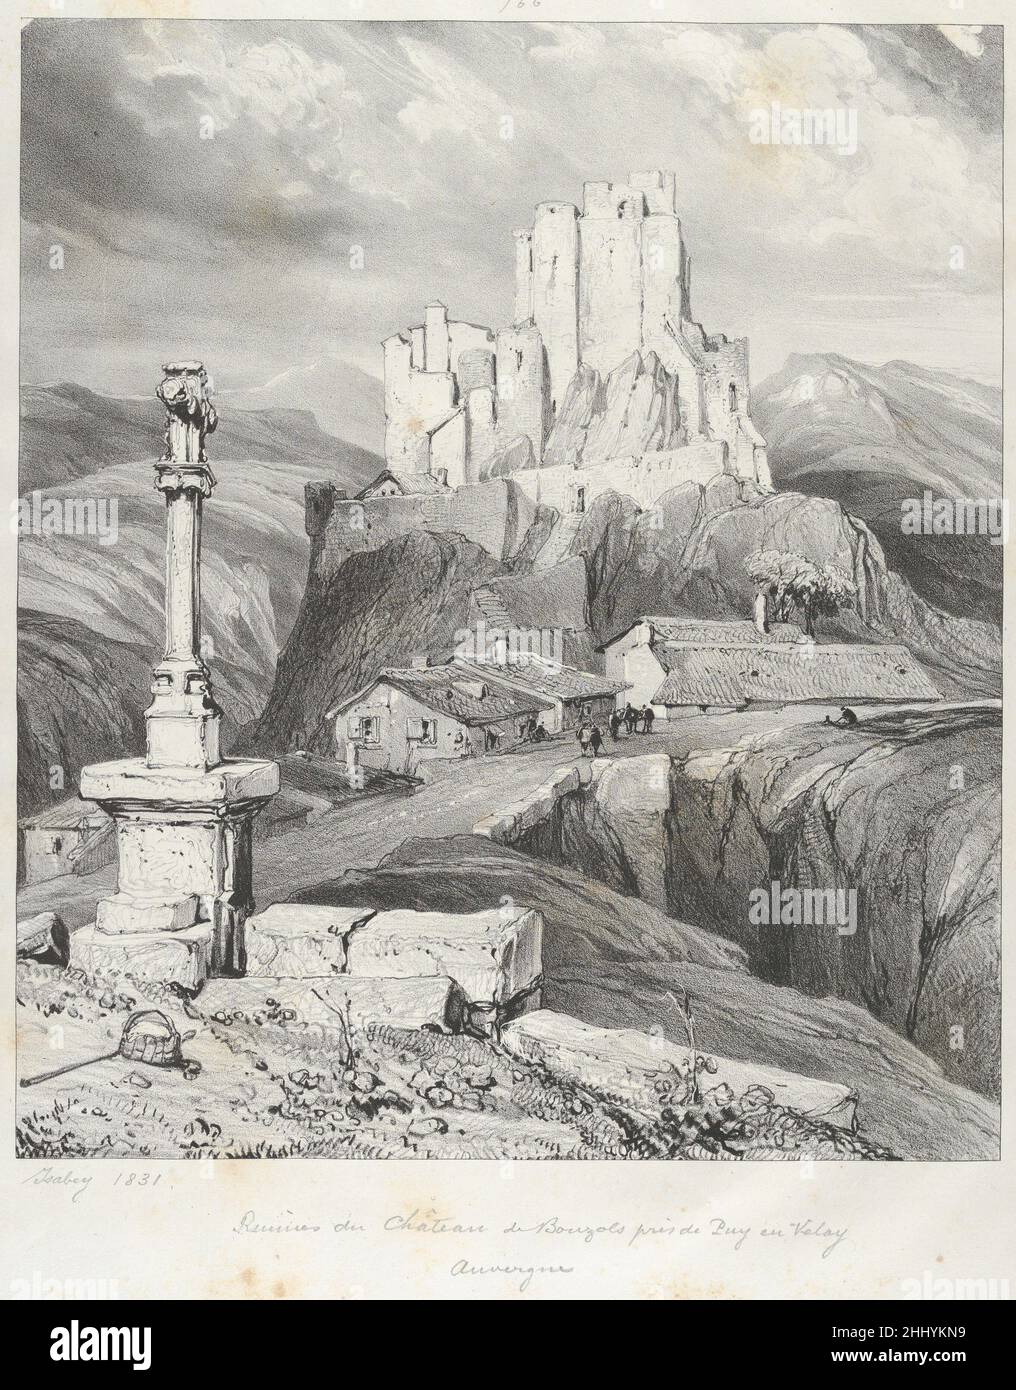 The Bouzols Castle Ruins Near Puy en Delay 1831 Eugène Isabey French This is from the series of prints Eugène Isabey made for the 'Auvergne' chapter of the book 'Voyages pittoresques et romantiques dans l'ancienne France'.. The Bouzols Castle Ruins Near Puy en Delay  688264 Stock Photo